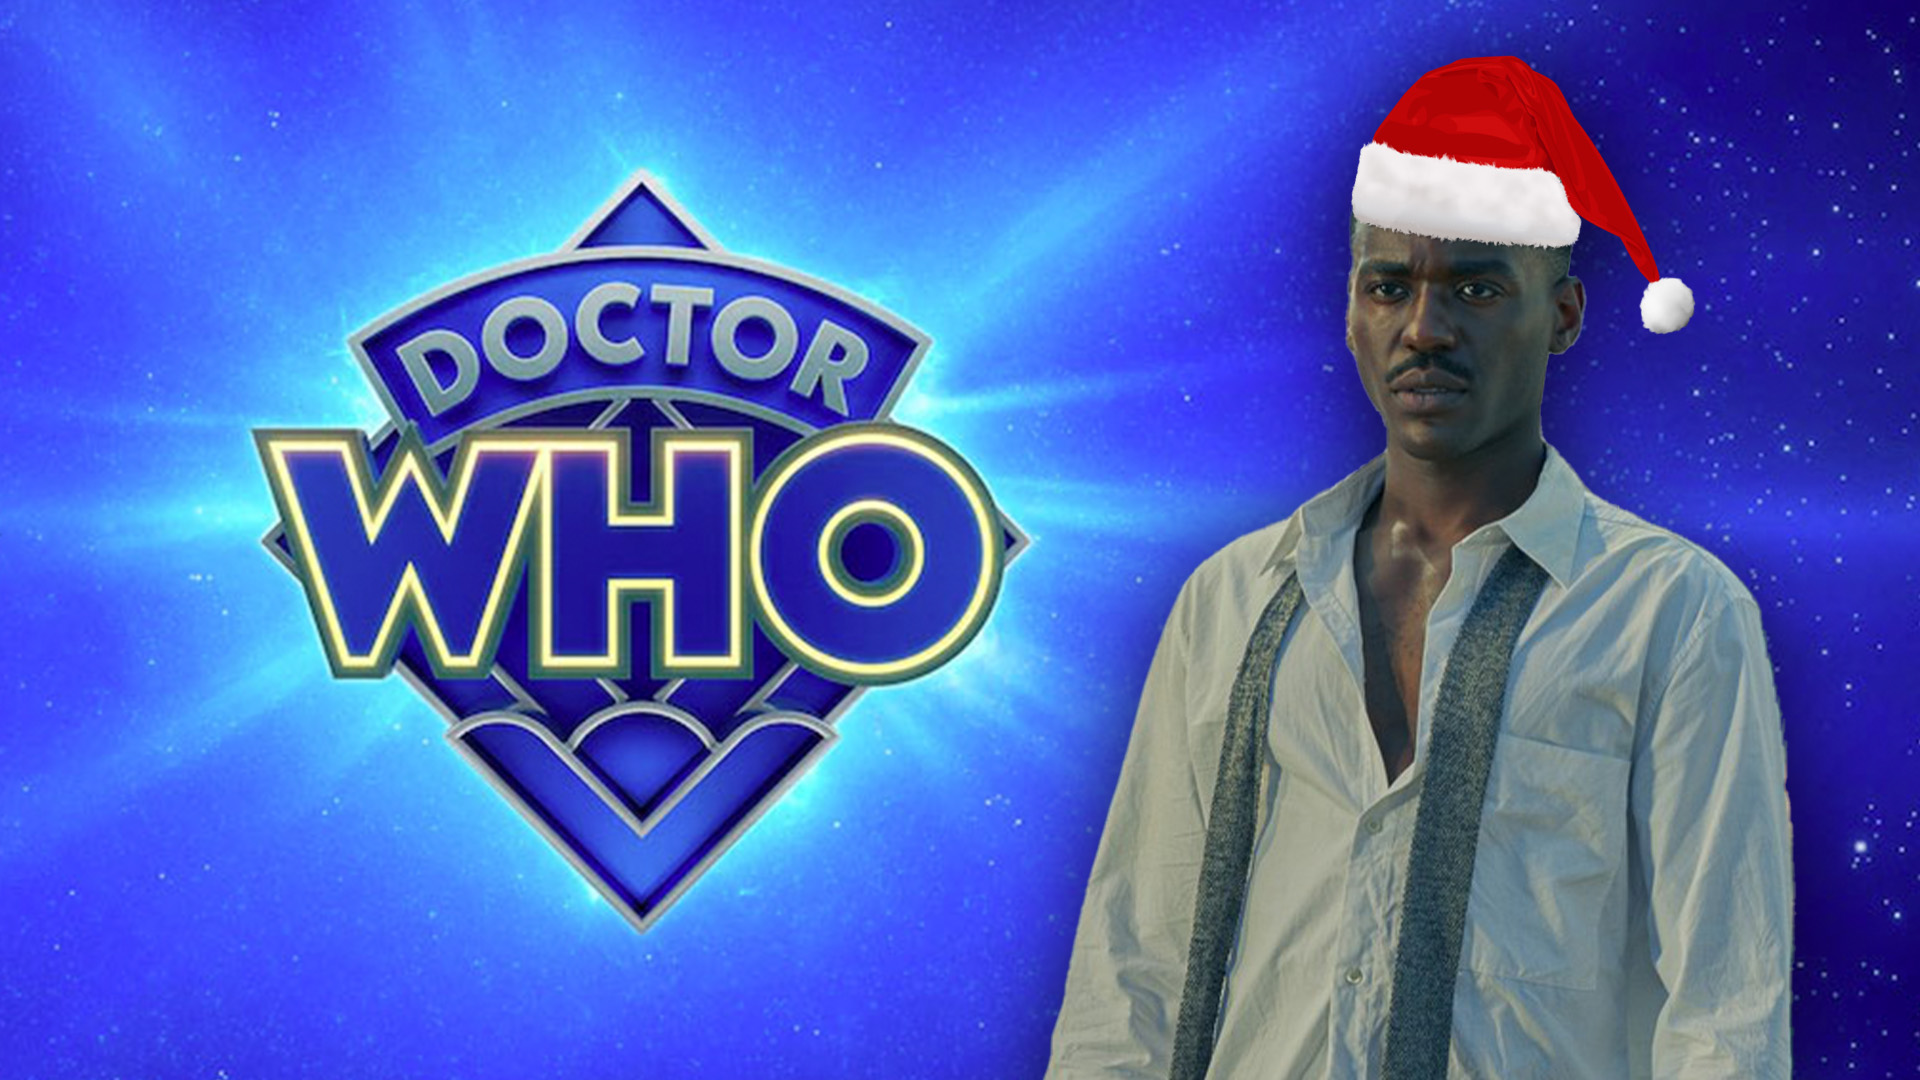 ‘Doctor Who’ Season 14 Episode Count Revealed, Christmas Specials To Return